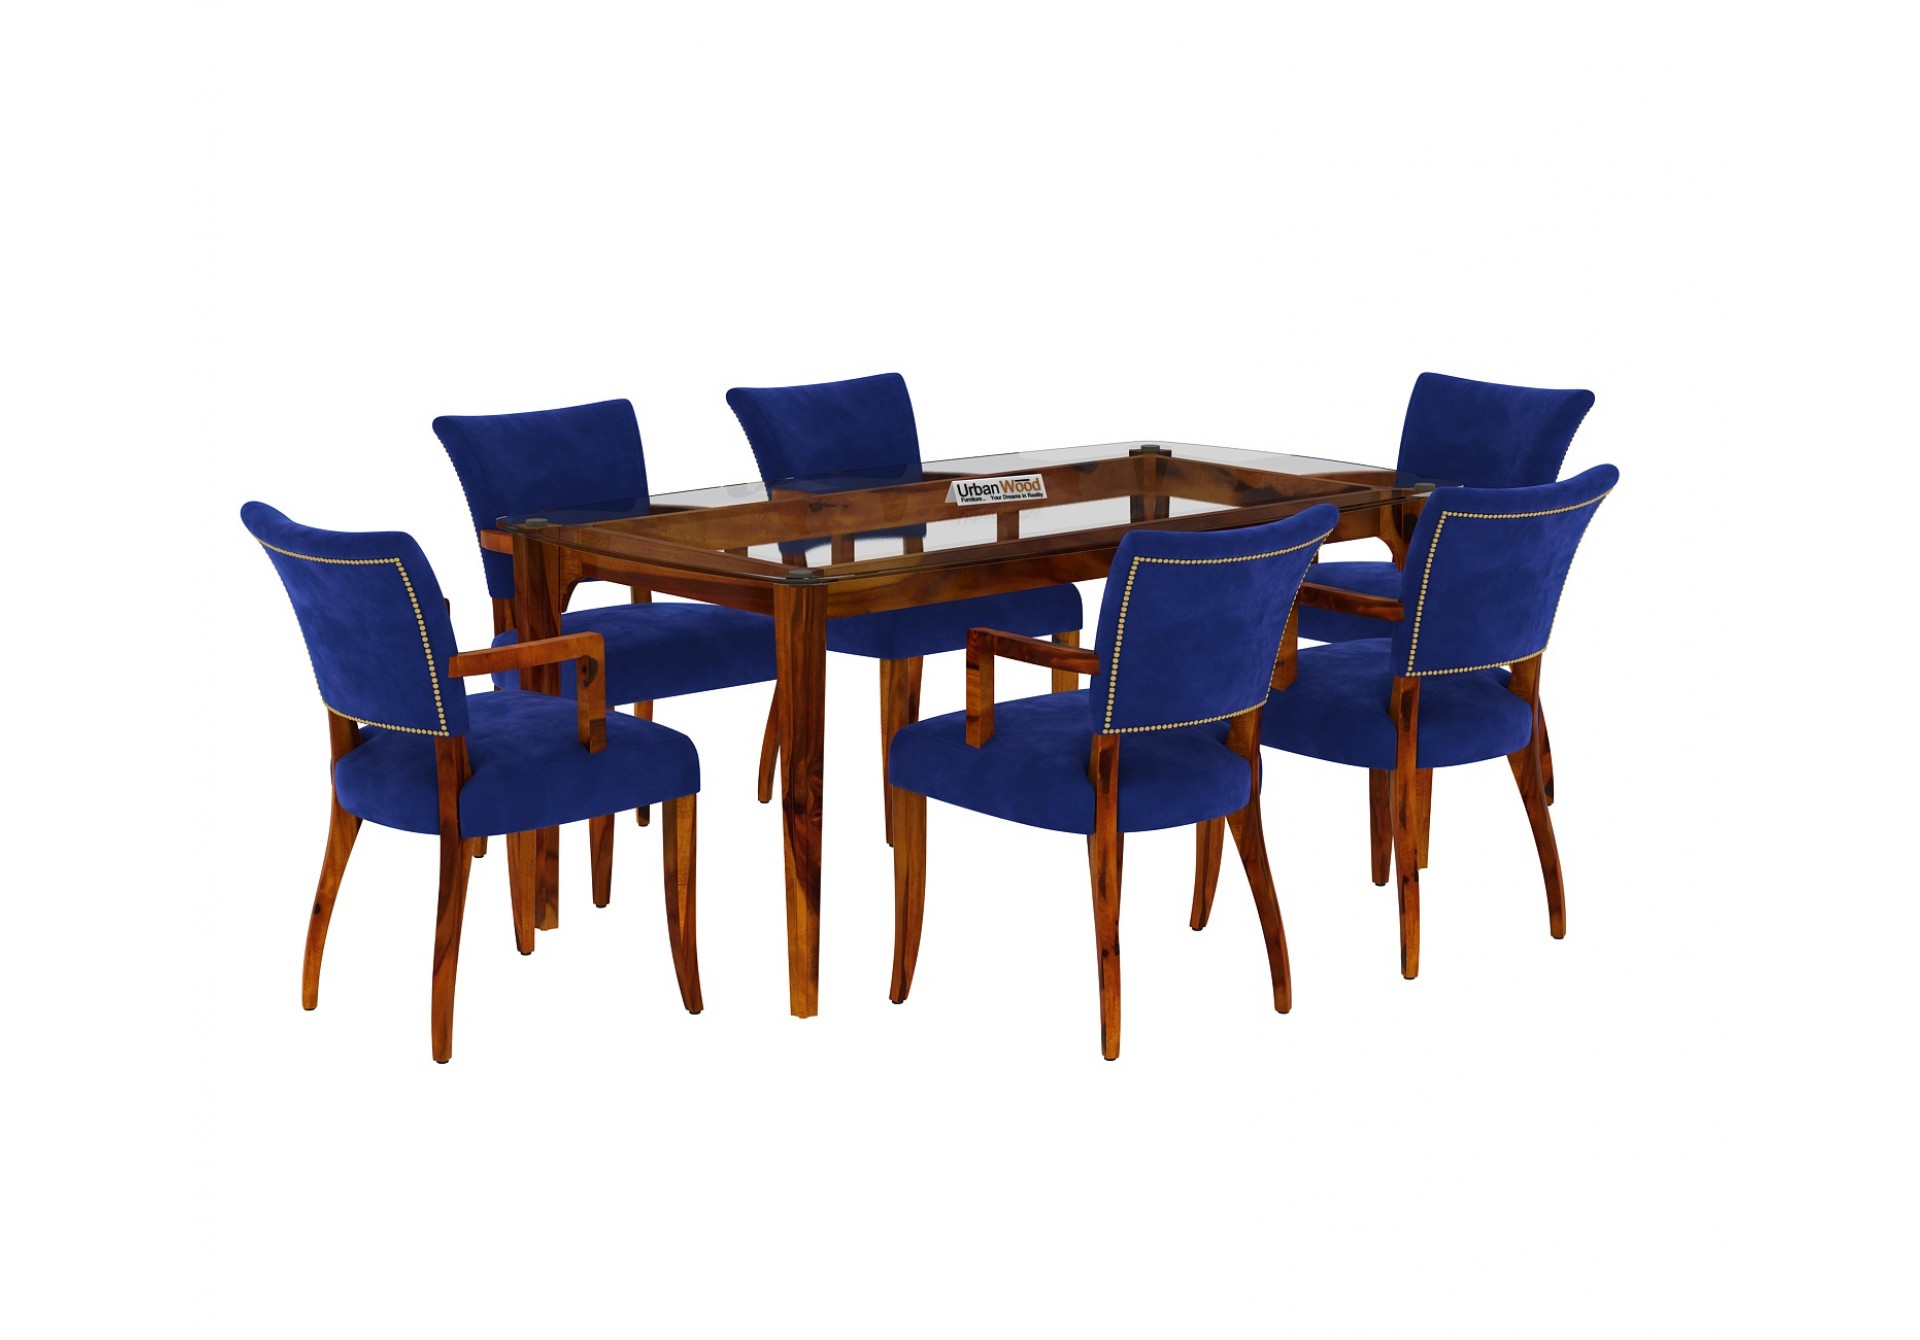 Quipo 6-Seater Dining Table Set (With Arms) (Honey Finish)